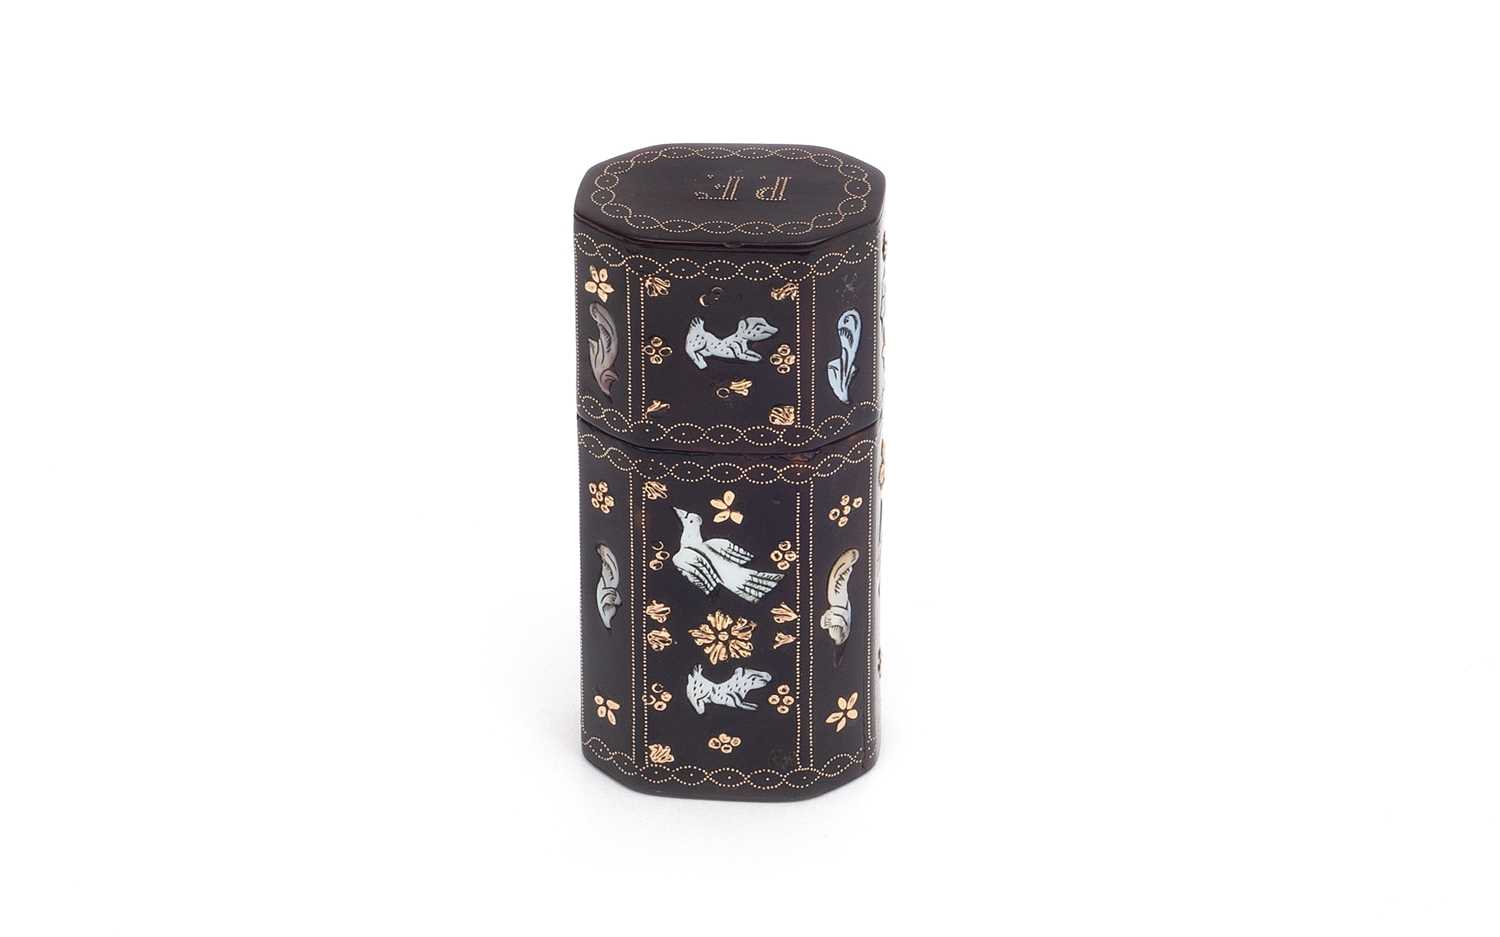 A FINE 18TH CENTURY NEAPOLITAN GOLD PIQUE AND MOTHER OF PEARL INLAID BOX - Image 4 of 6